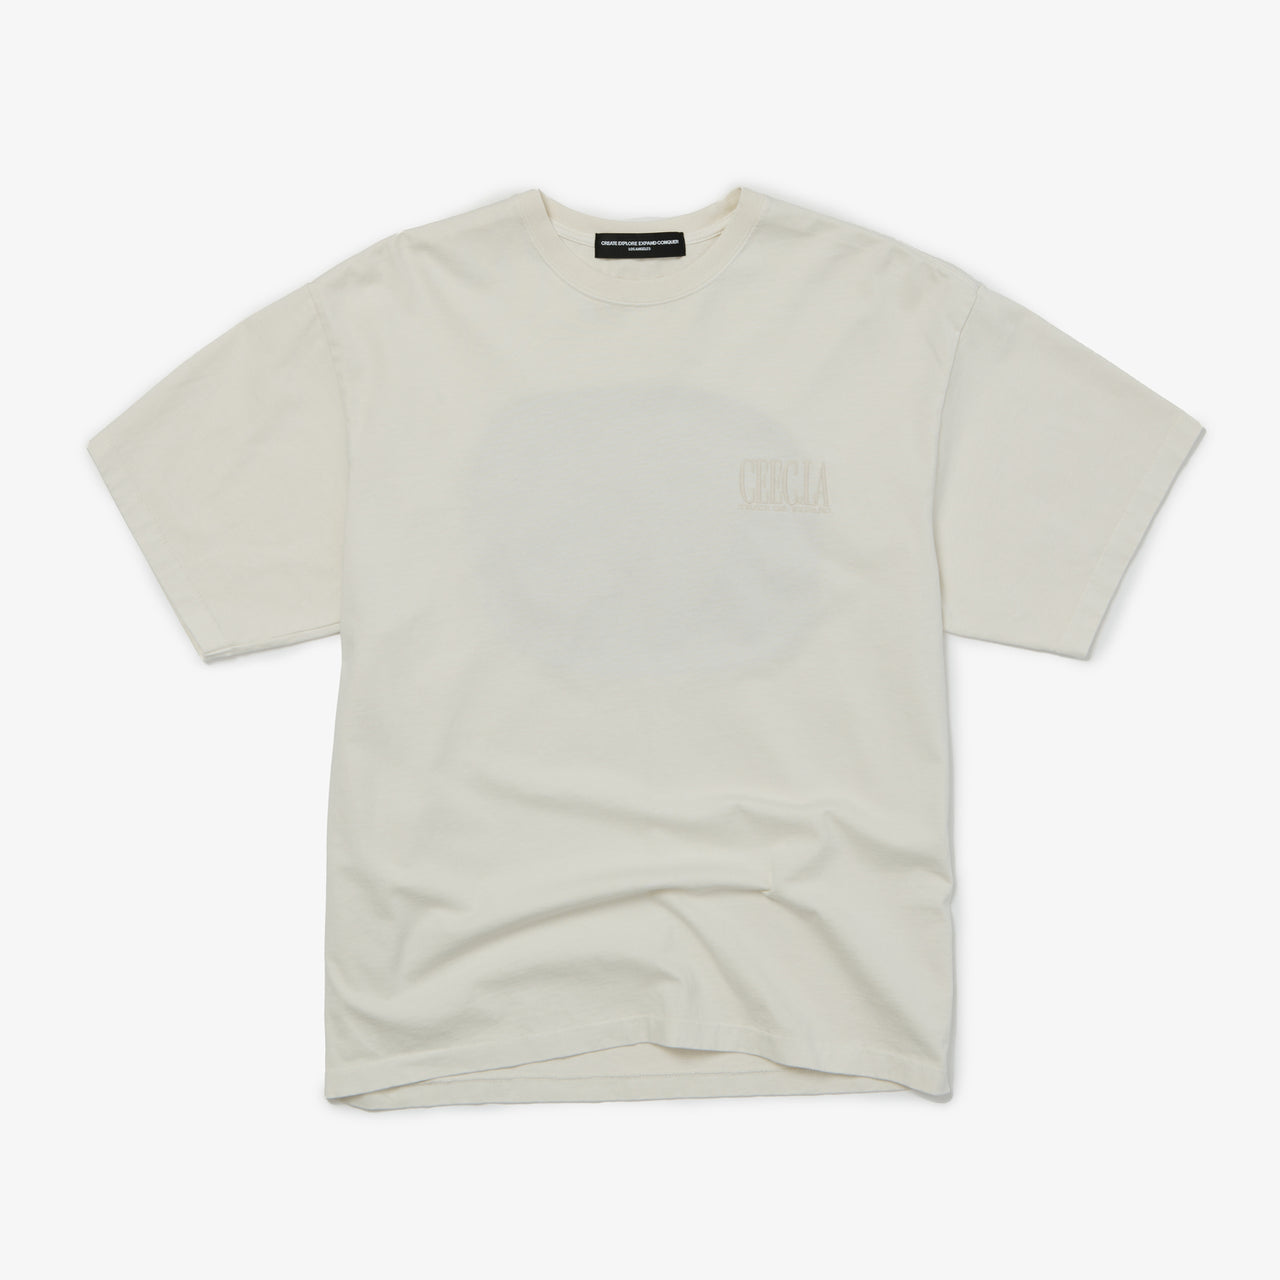 C.E.E.C. Embroidered T-Shirt in Vintage White